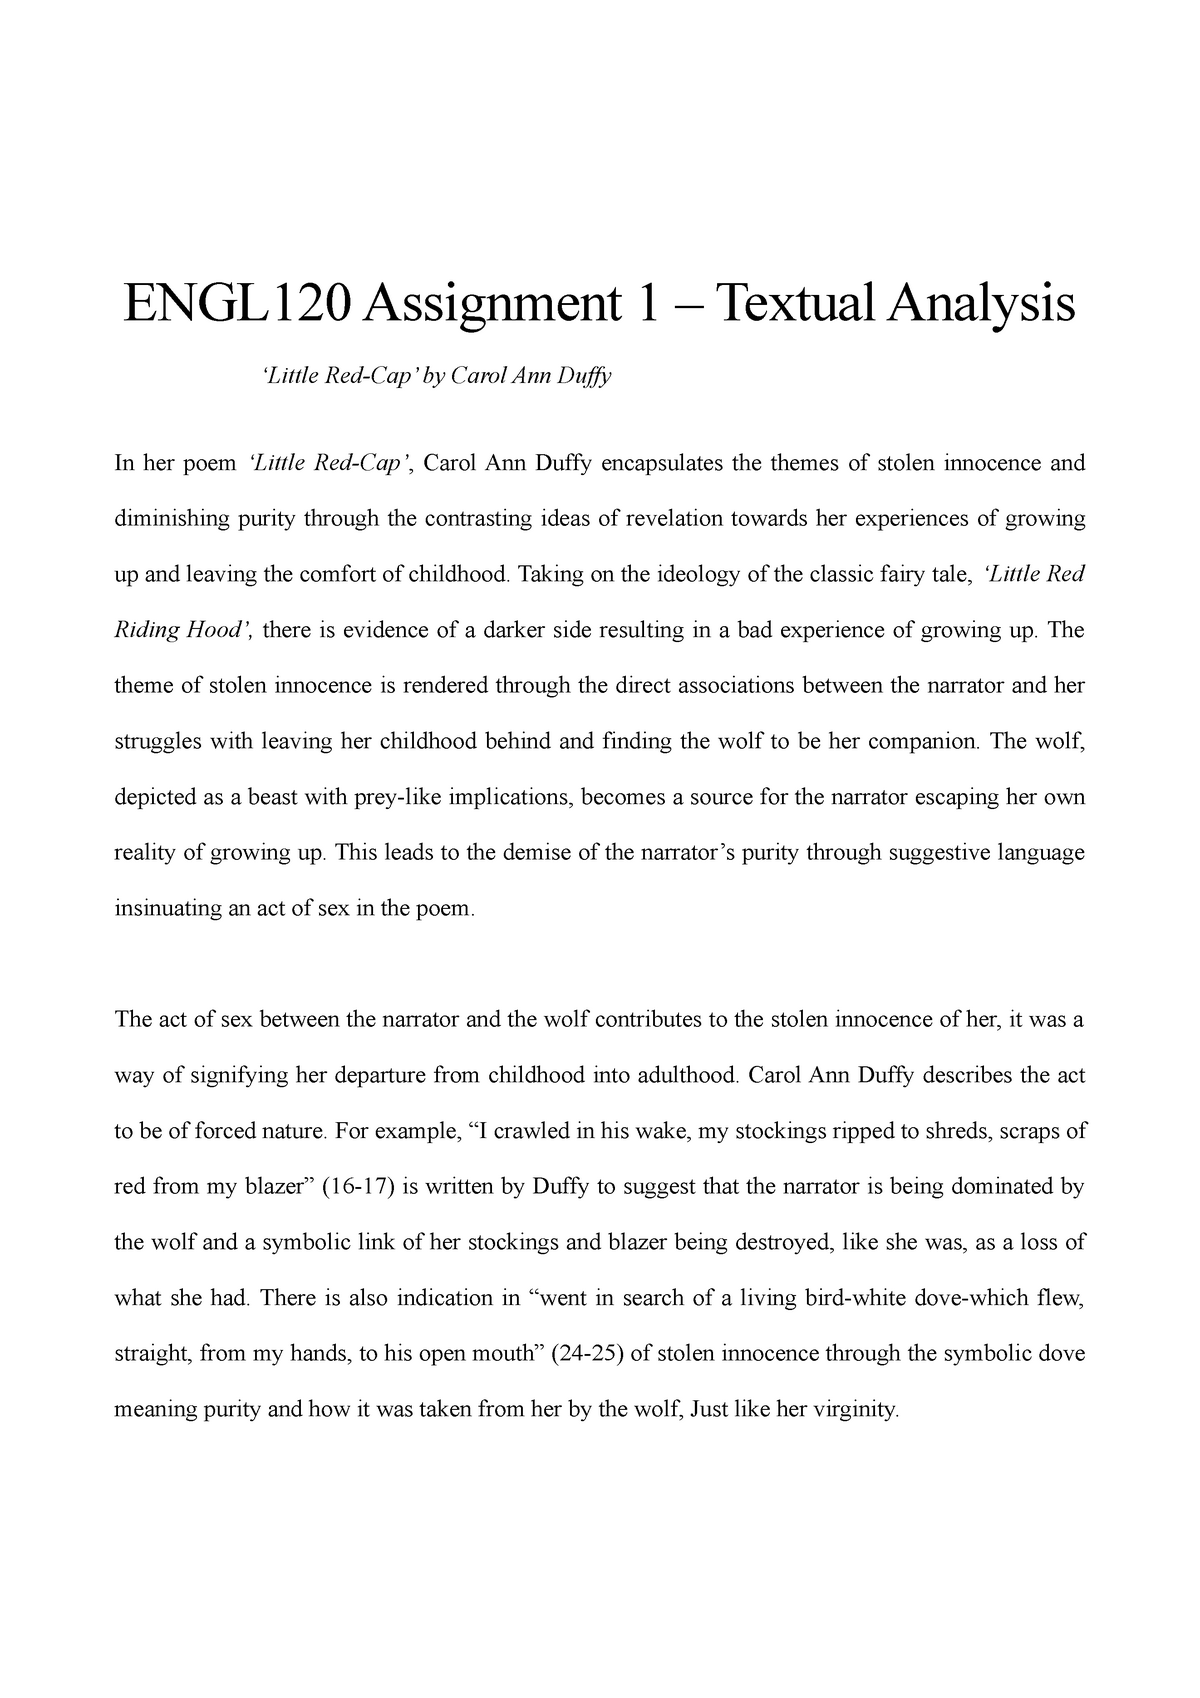 ENGL120 Assignment 1 Textual Analysis - Approaches to English - StuDocu